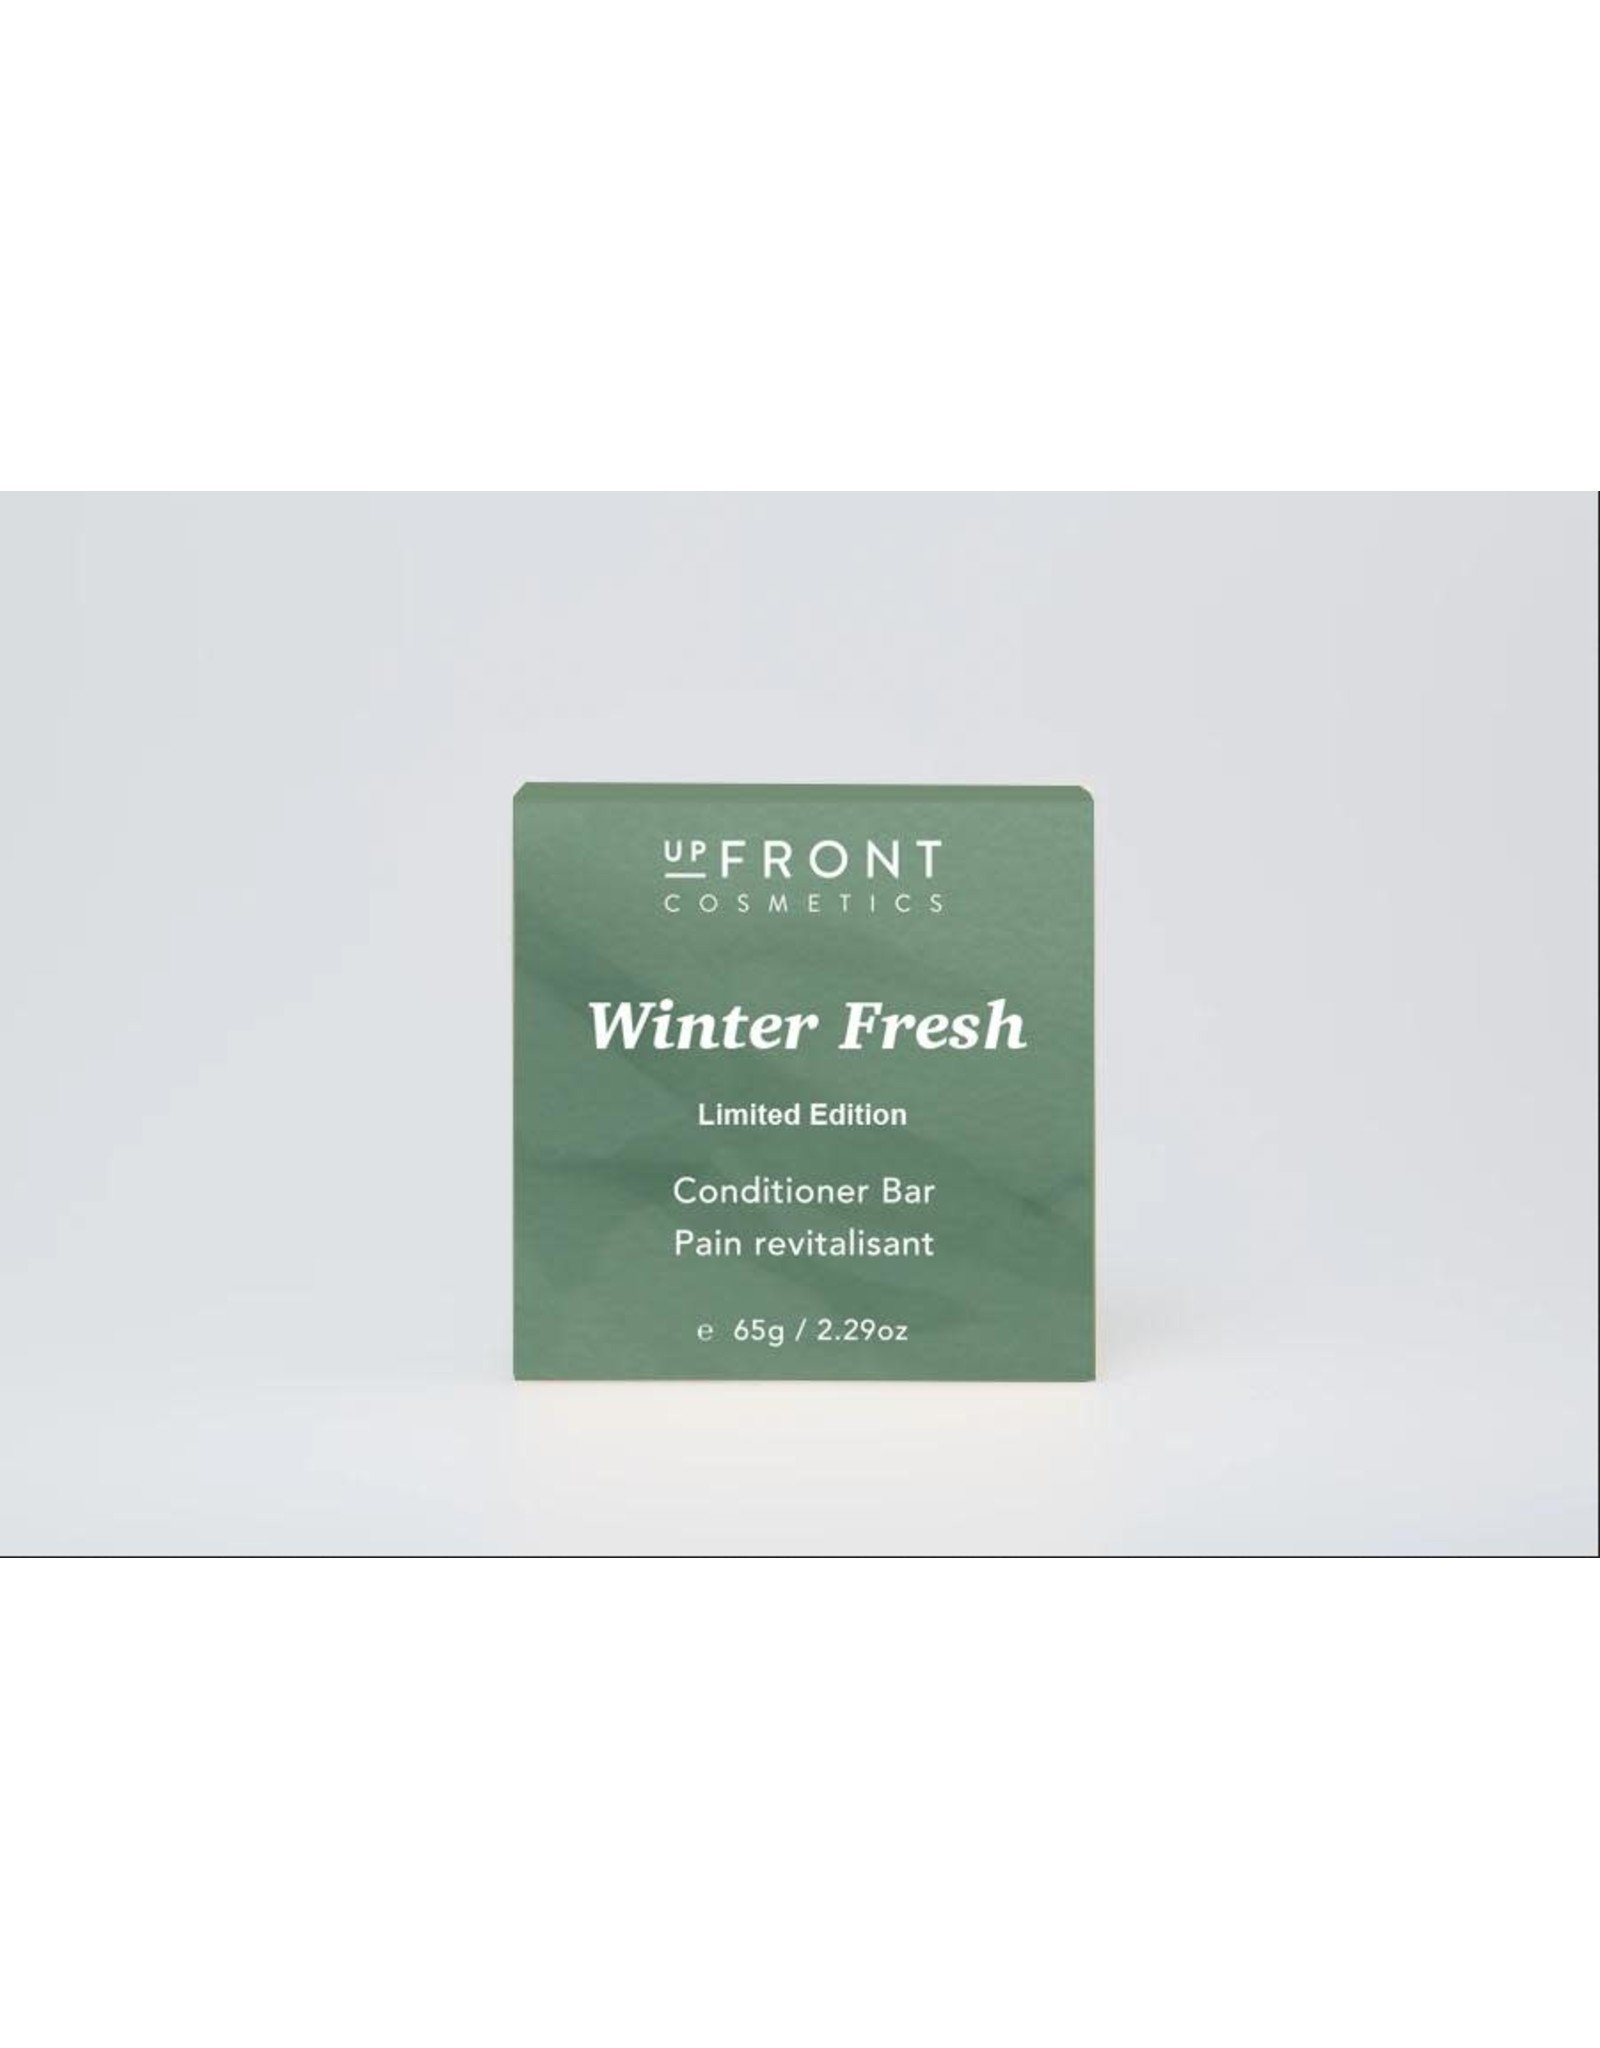 Upfront Cosmetics Limited Edition Conditioner Bar by Upfront Cosmetics